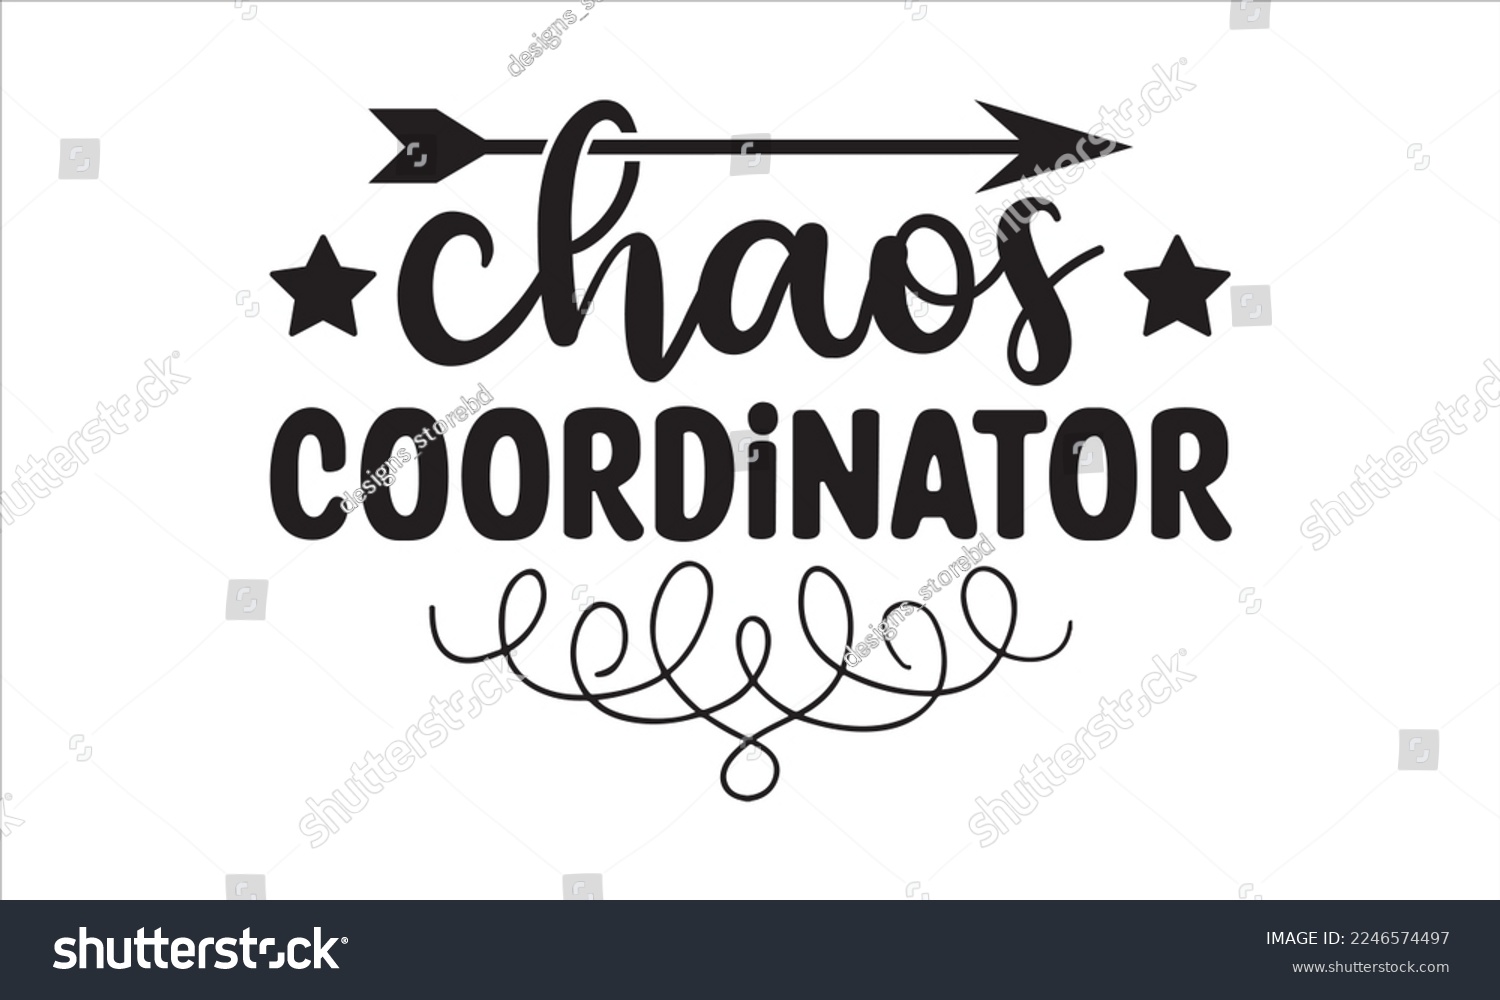 SVG of Chaos coordinator Svg, Teacher SVG, Teacher SVG t-shirt design, Hand drawn lettering phrases, templet, Calligraphy graphic design, SVG Files for Cutting Cricut and Silhouette svg